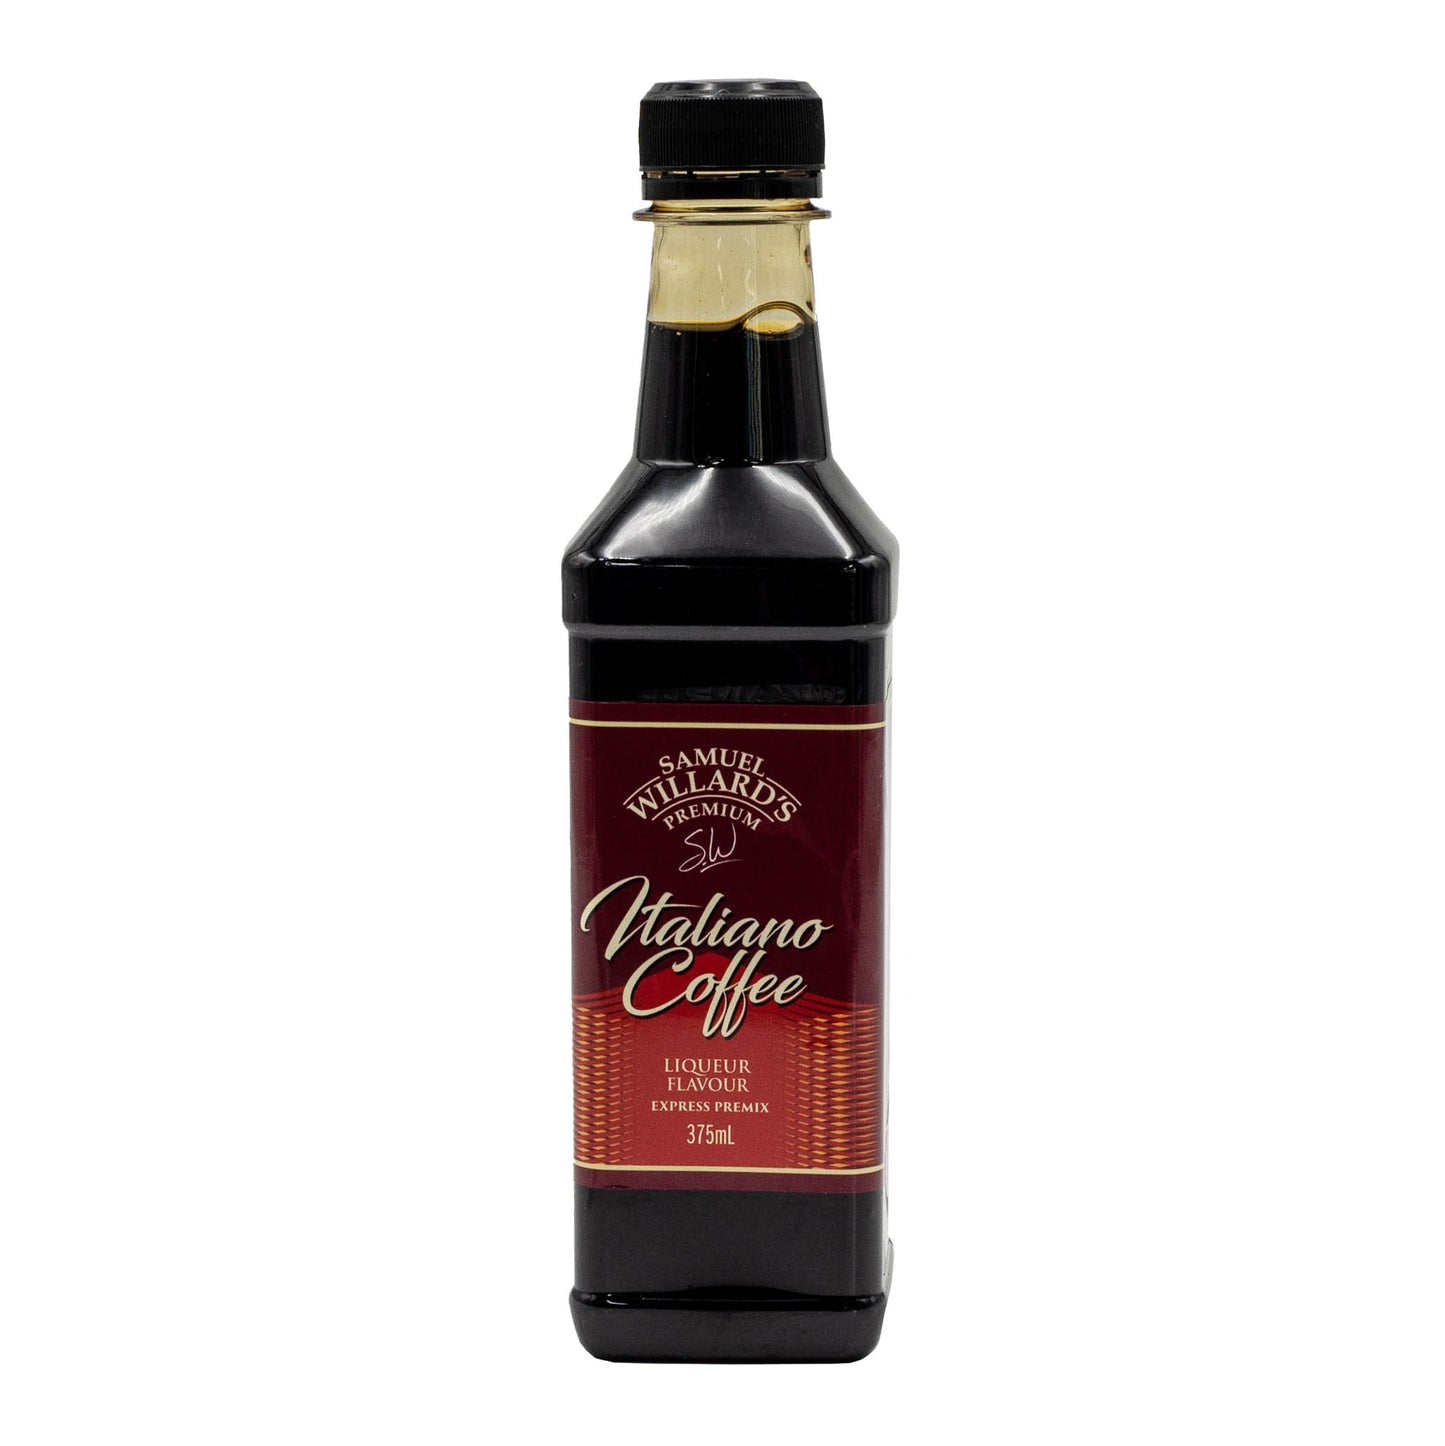 Samuel Willards Italiano Coffee premix makes a Tia Maria style drink. Will make 1125ml of finished product from each 375ml bottle